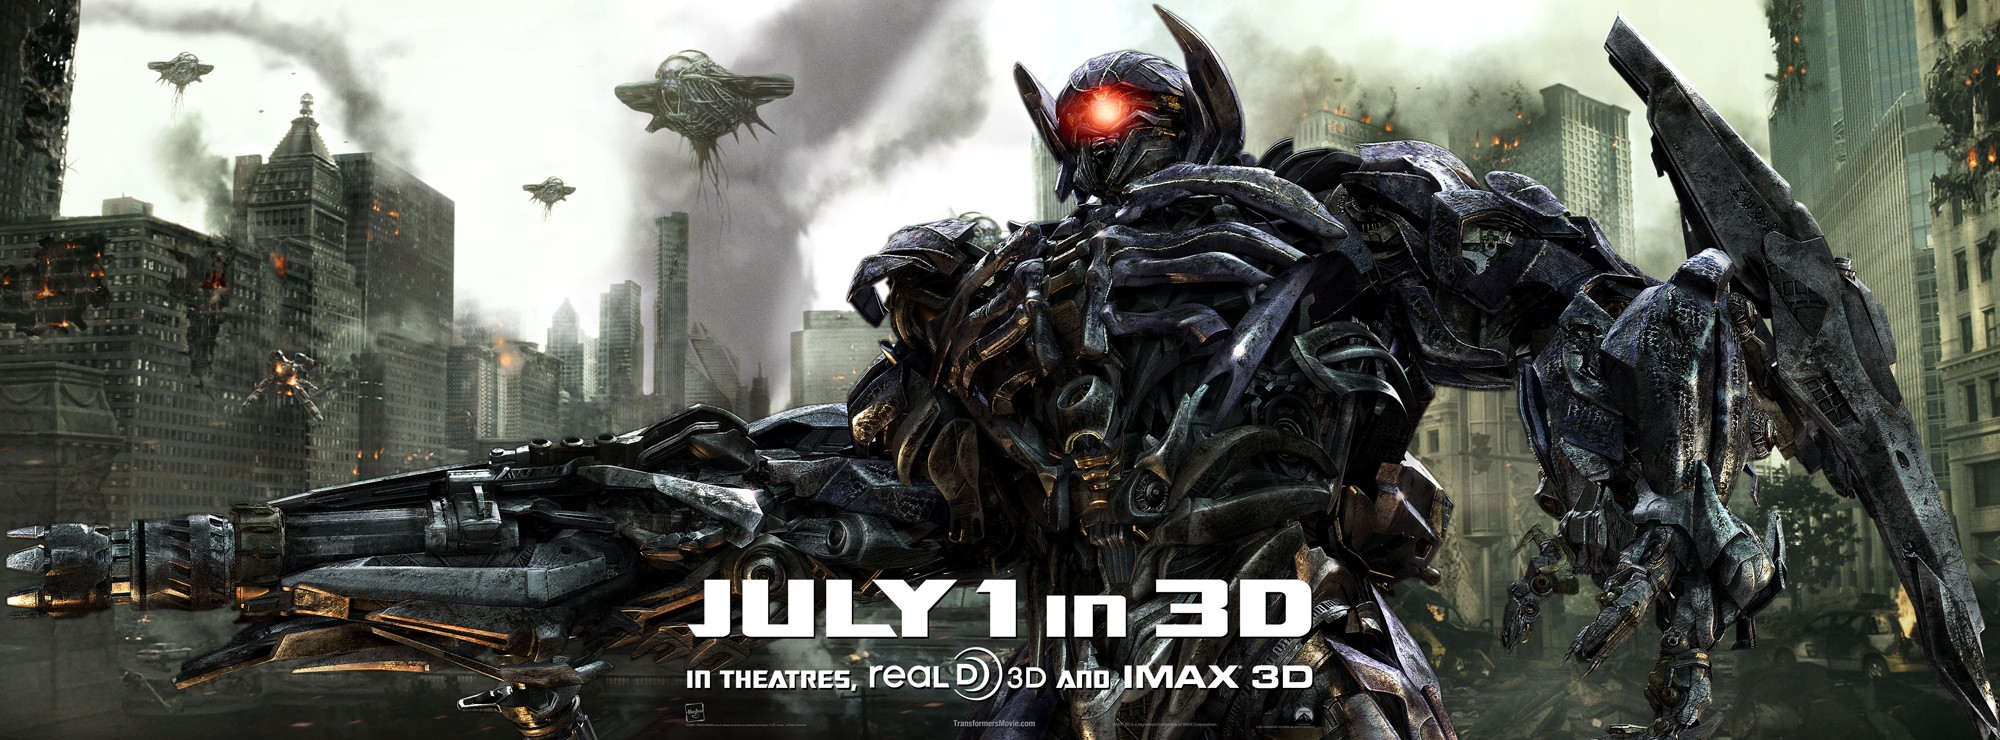 Mega Sized Movie Poster Image for Transformers: Dark of the Moon (#3 of 9)